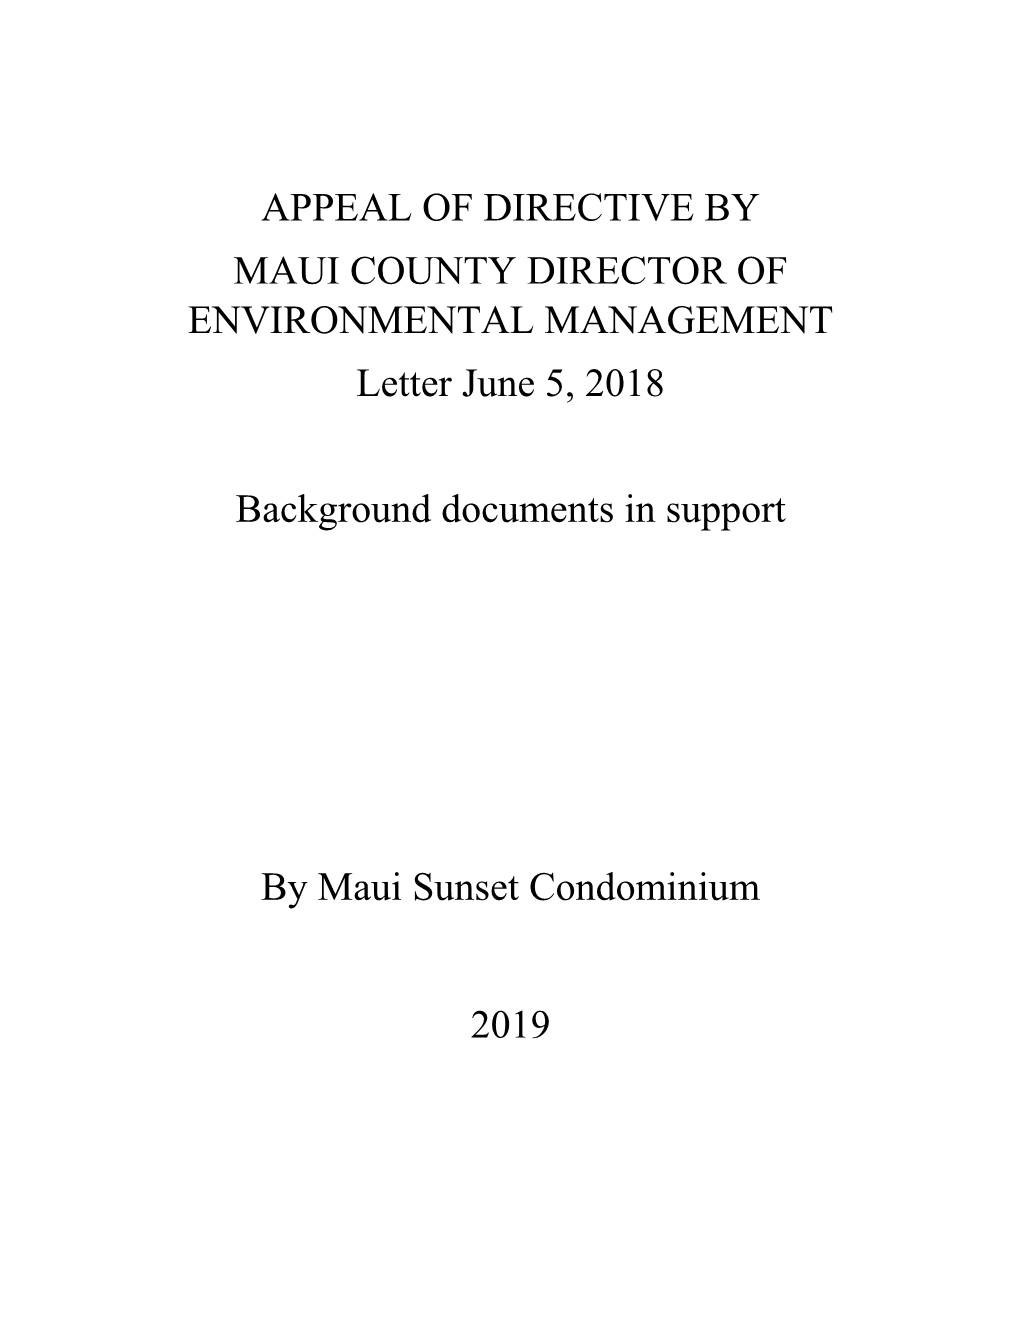 APPEAL of DIRECTIVE by MAUI COUNTY DIRECTOR of ENVIRONMENTAL MANAGEMENT Letter June 5, 2018